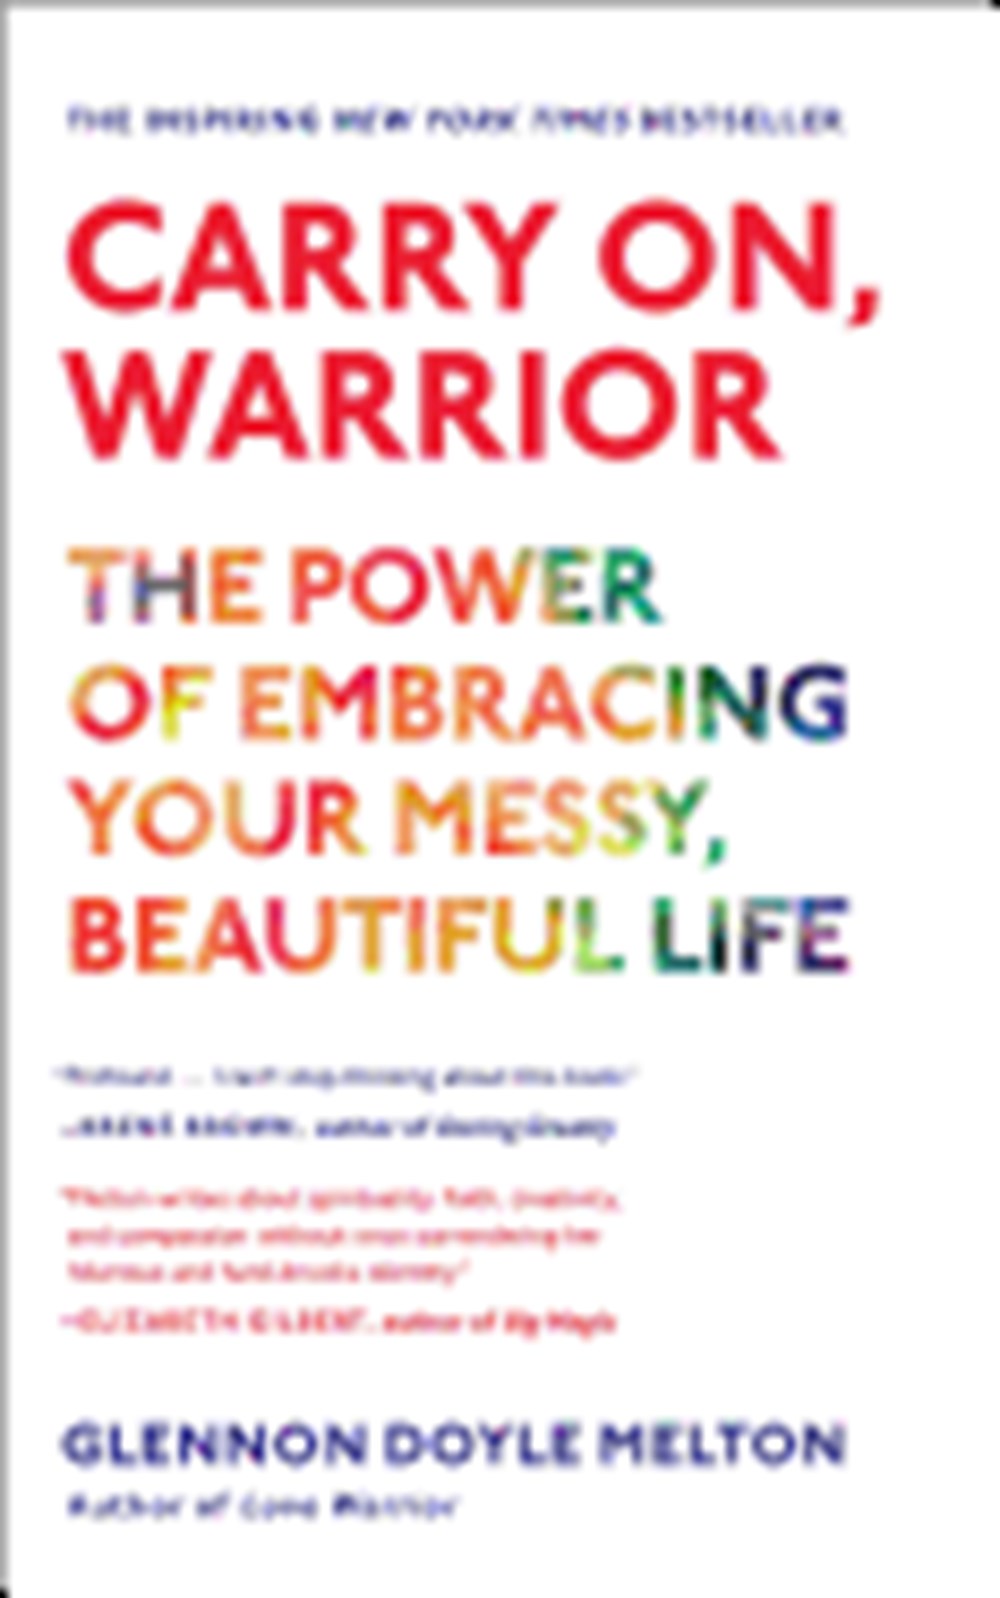 Carry On, Warrior The Power of Embracing Your Messy, Beautiful Life